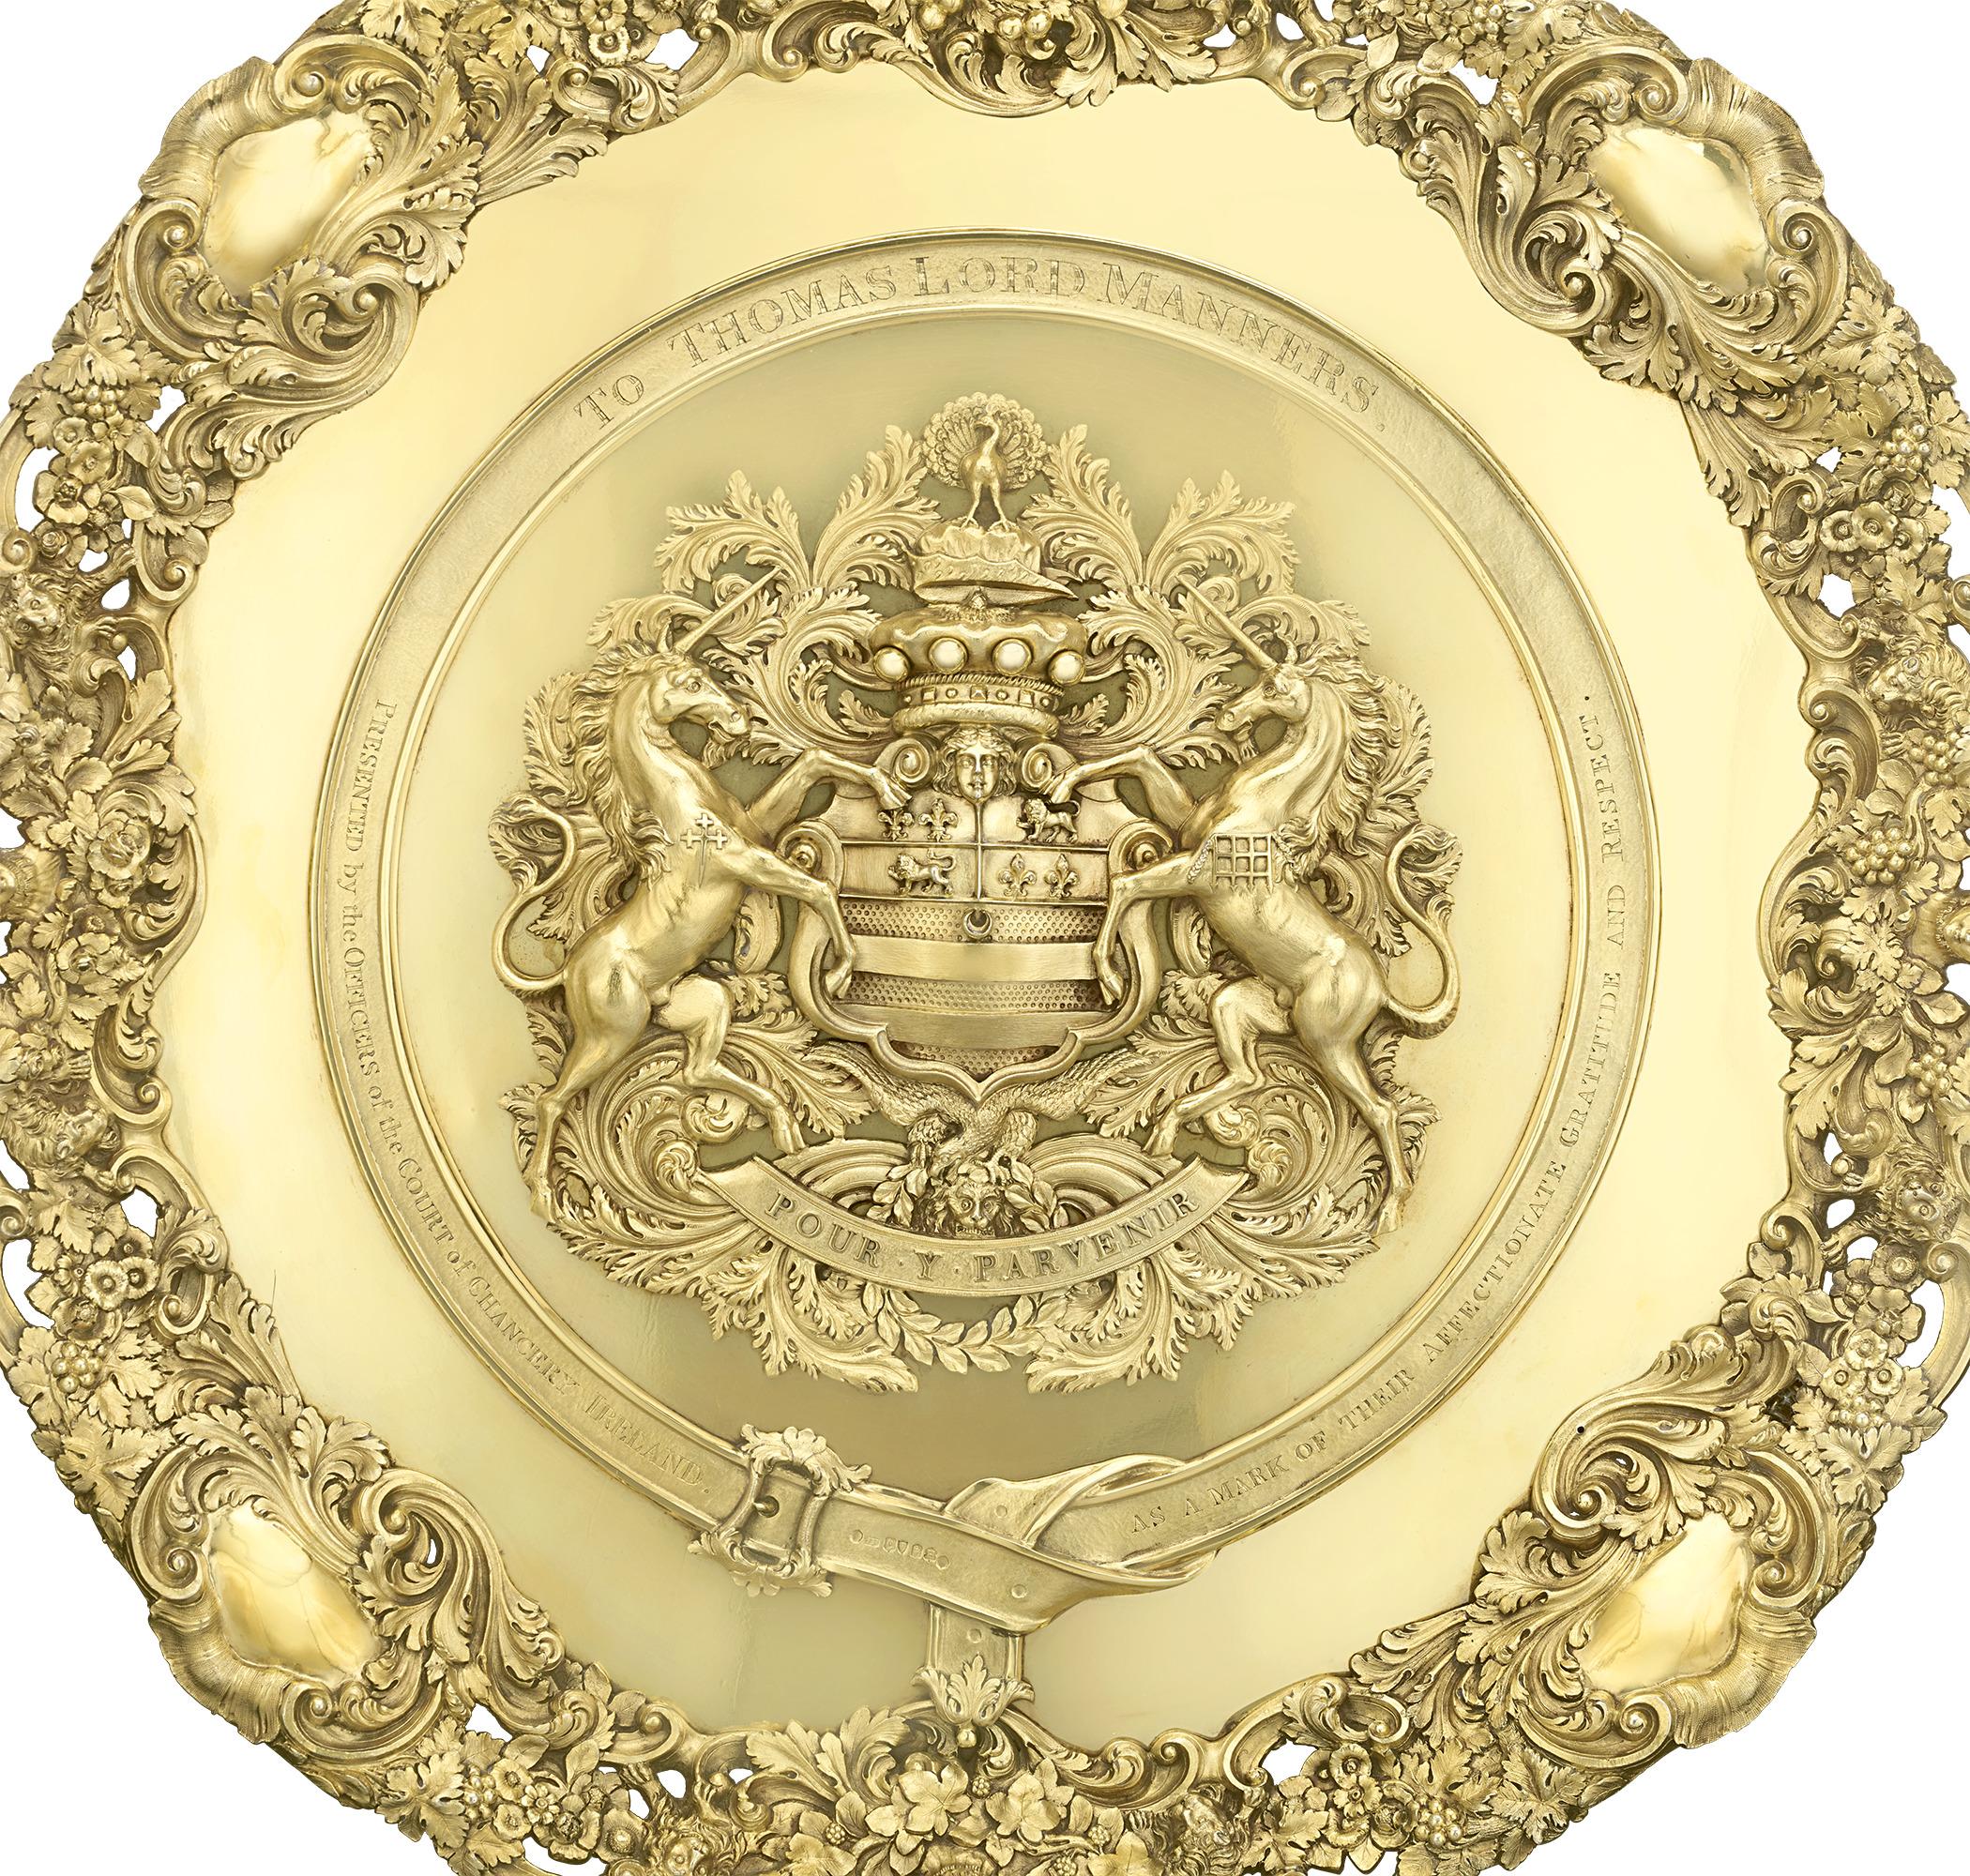 This George IV Silver Gilt Charger was made for Thomas Manners-Sutton to mark the end of his career as the highest judicial officer in Ireland. Made with over 28 pounds of silver, five times the weight of an average charger, this object is further